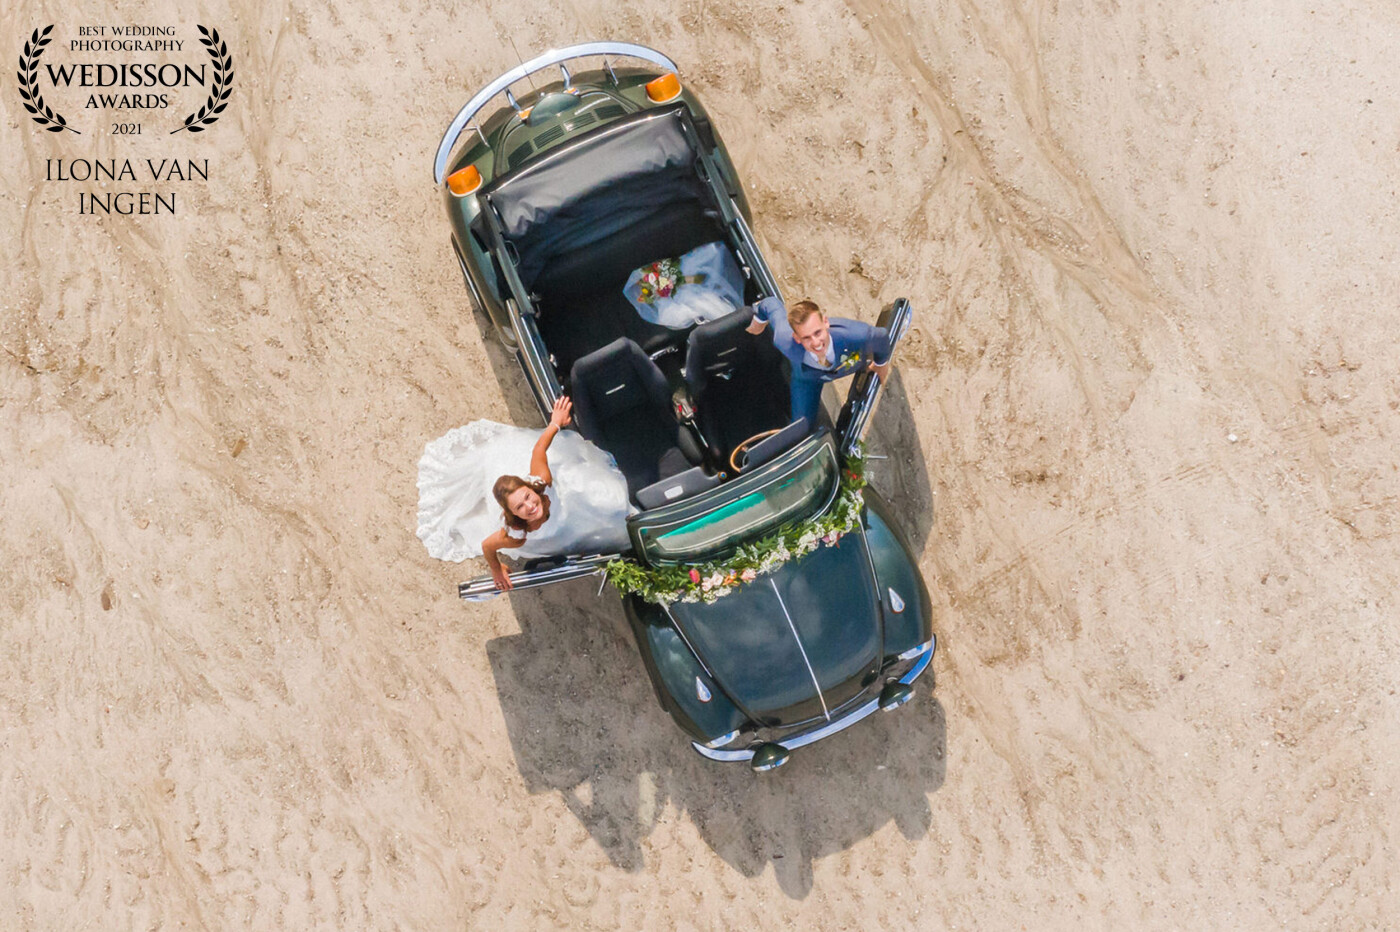 Near a sand extraction place in Markelo. This amazing couple found an amazing place to take pictures. And look at this car! Really an great picture.